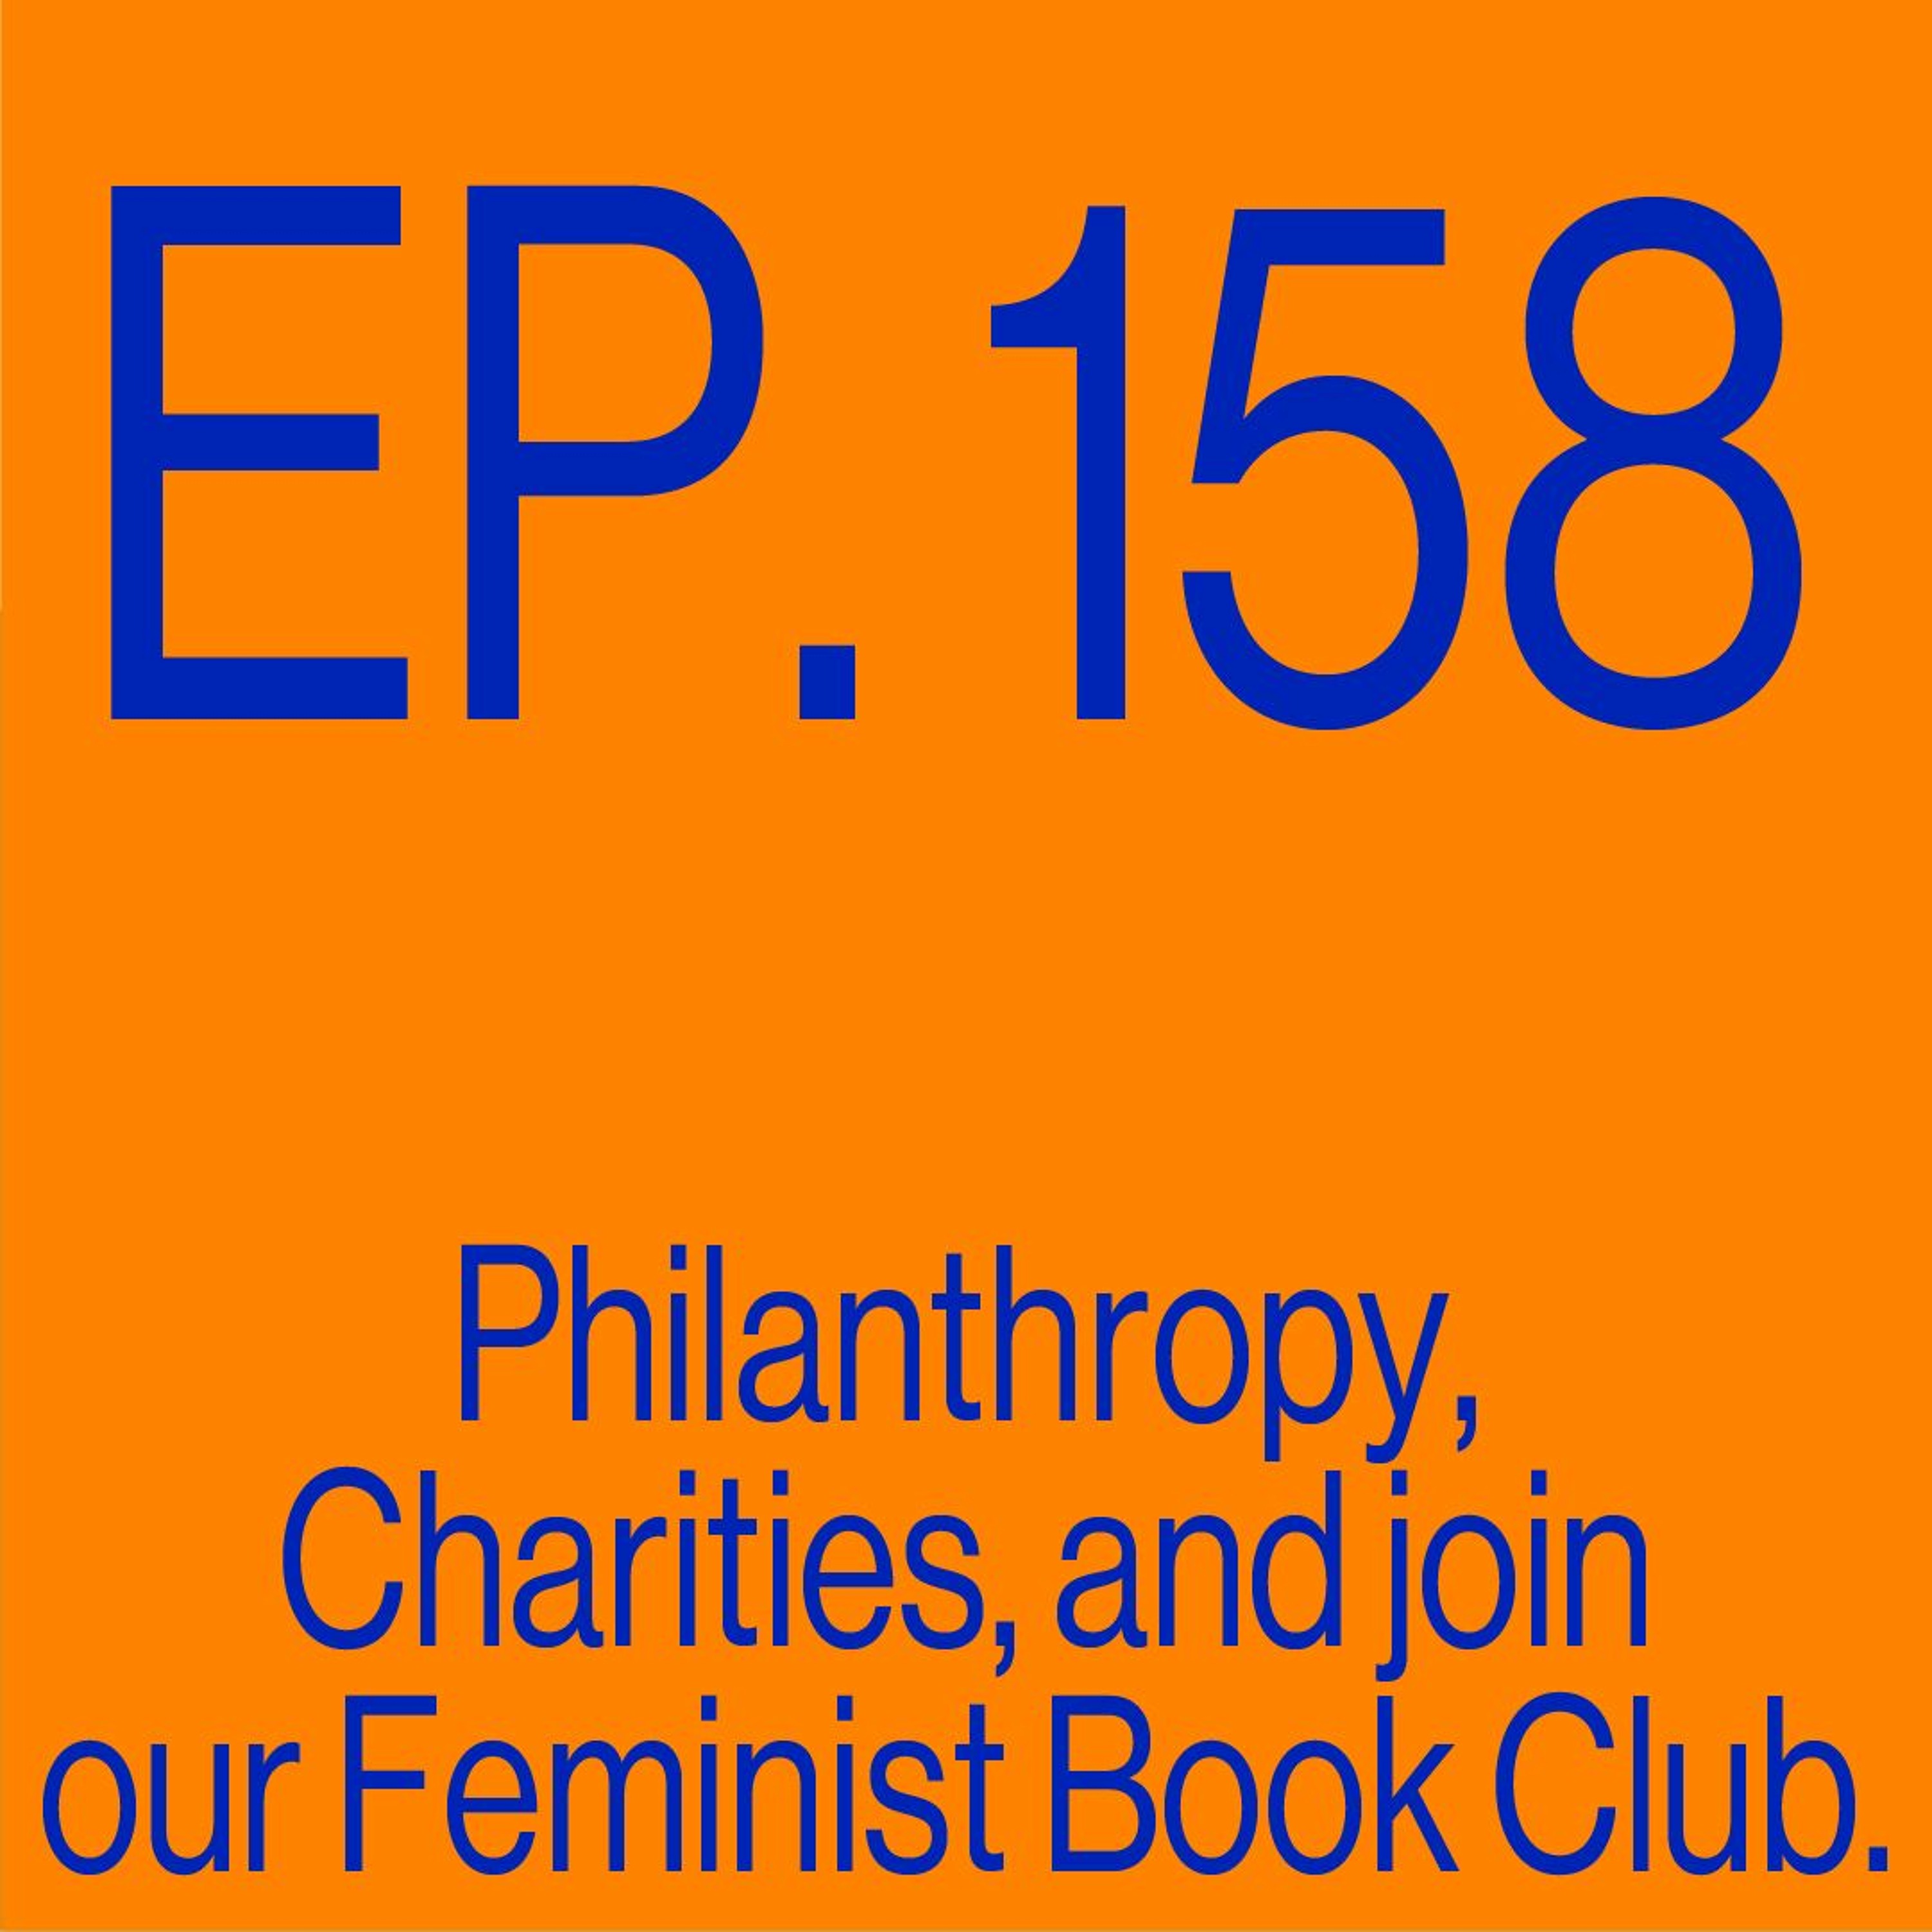 Episode 158: Philanthropy, Charities, and Join our Feminist Book Club